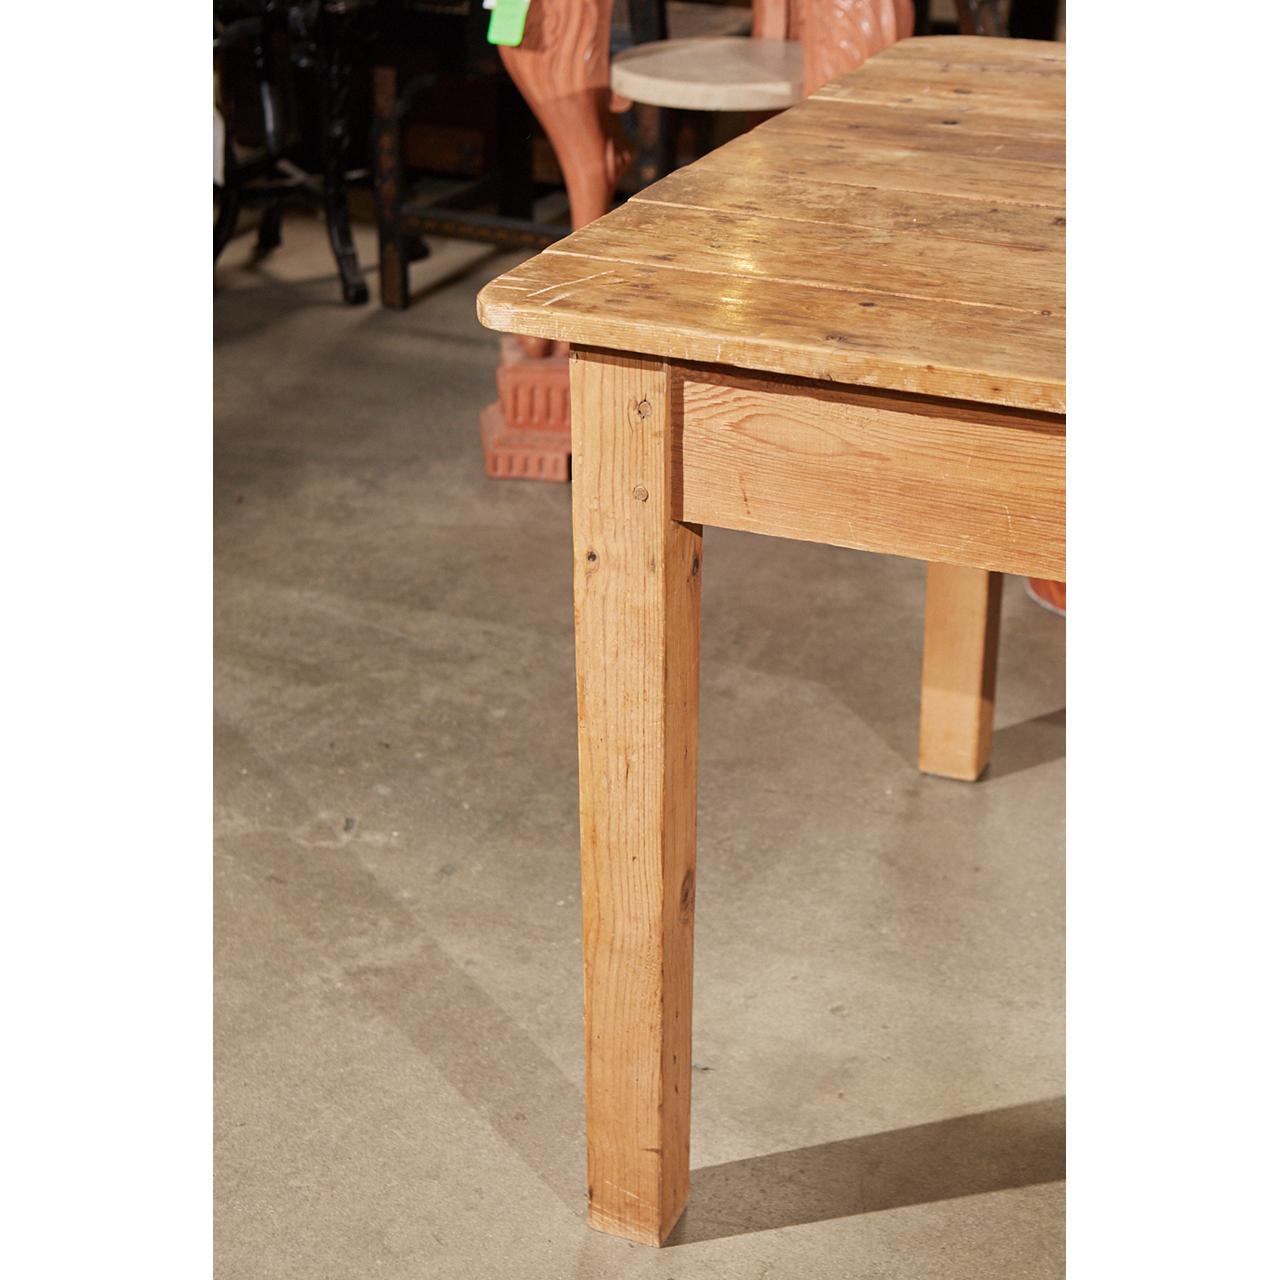 This country pine table is thought to be made in the late 19th or early 20th century in Ireland. The piece shows age and use with a well worn top and peg construction on the squared, gently tapered legs.
 